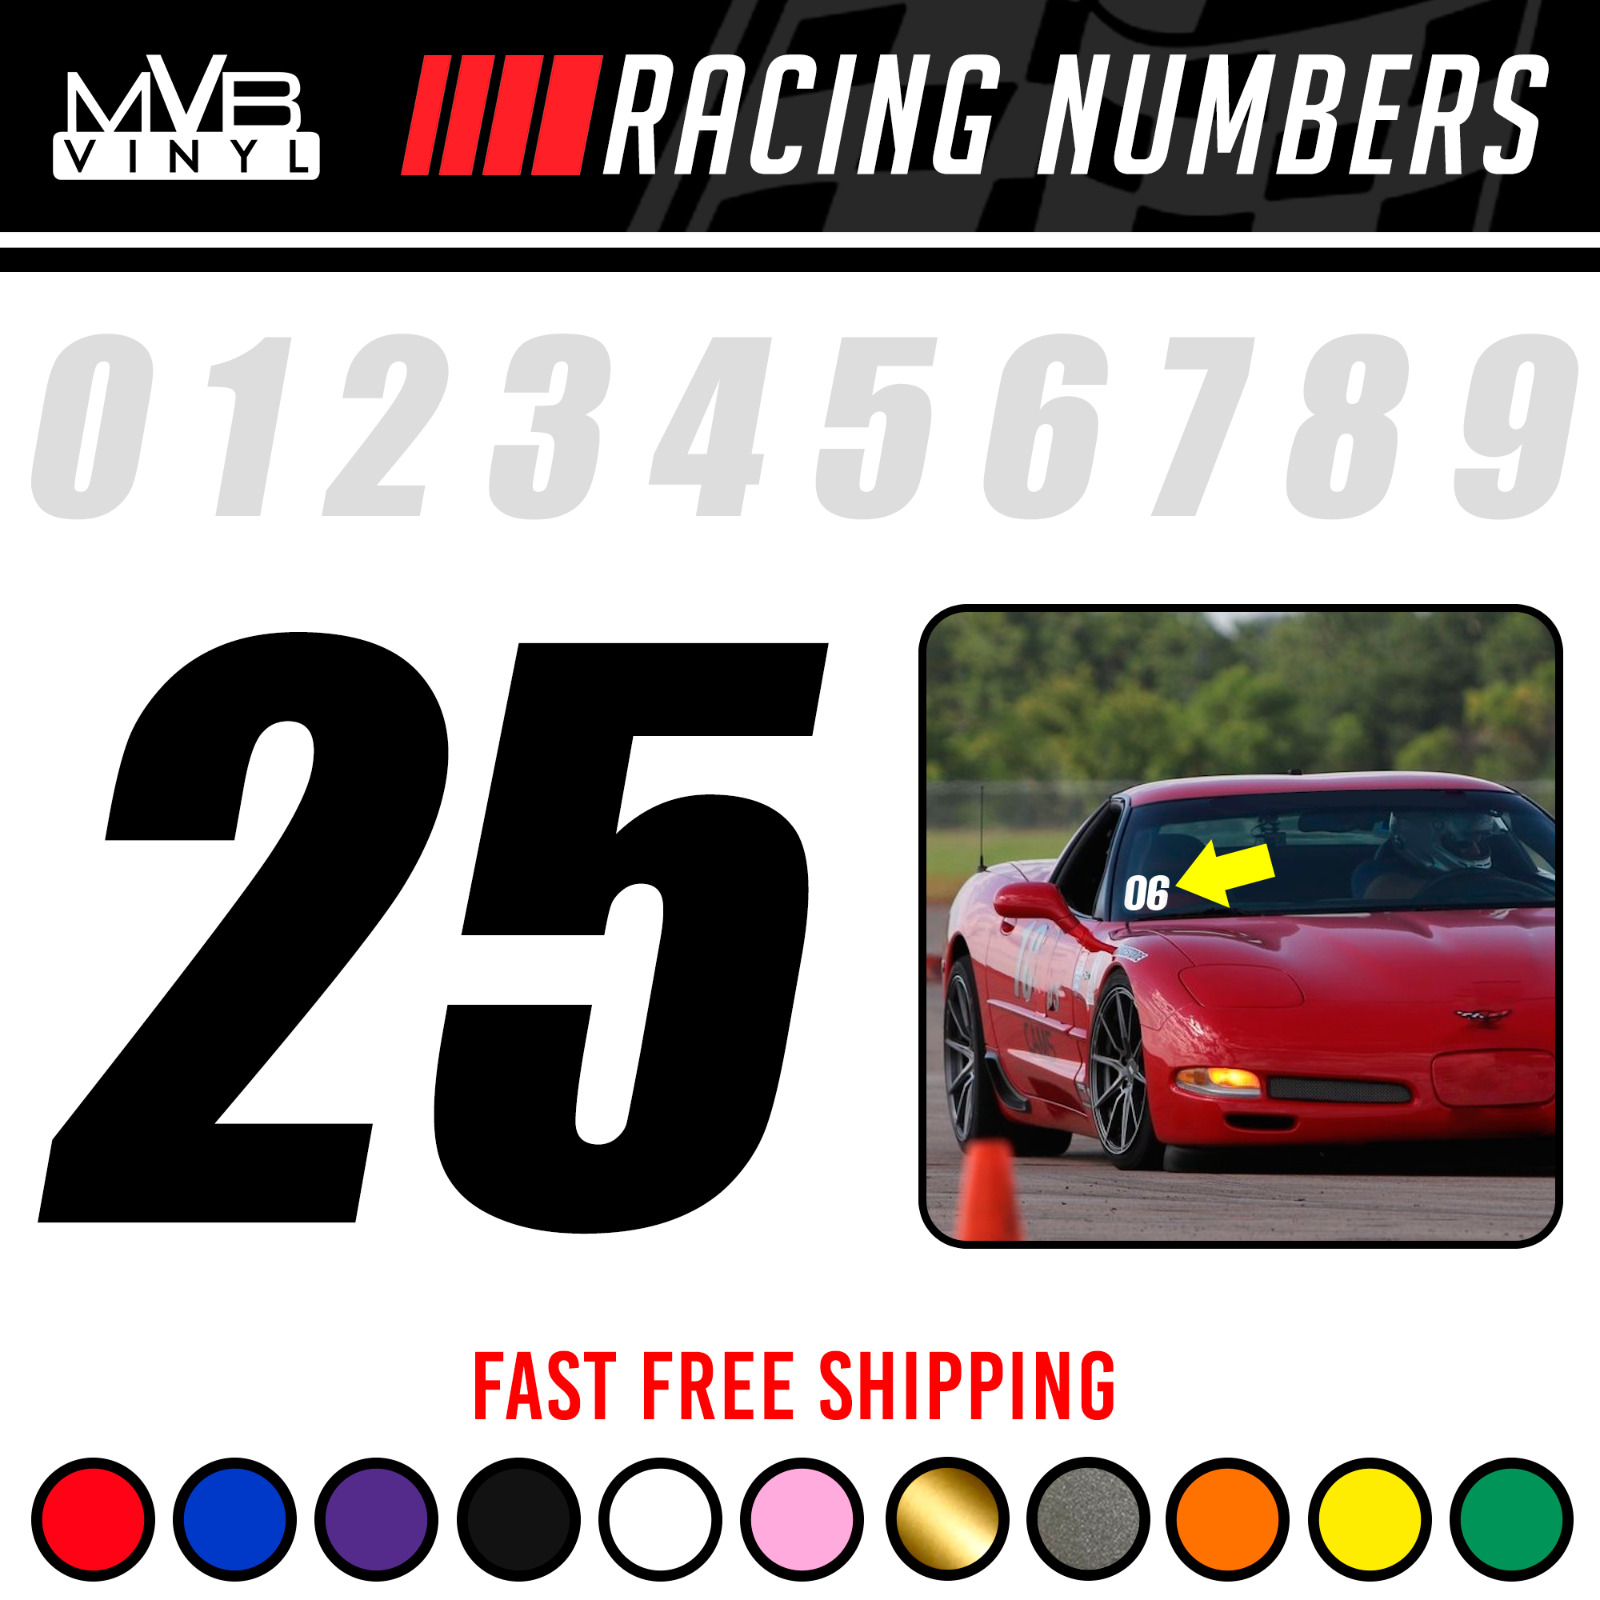 Racing Numbers Vinyl Decal Stickers | Windshield Track Drag Strip Autocross NHRA